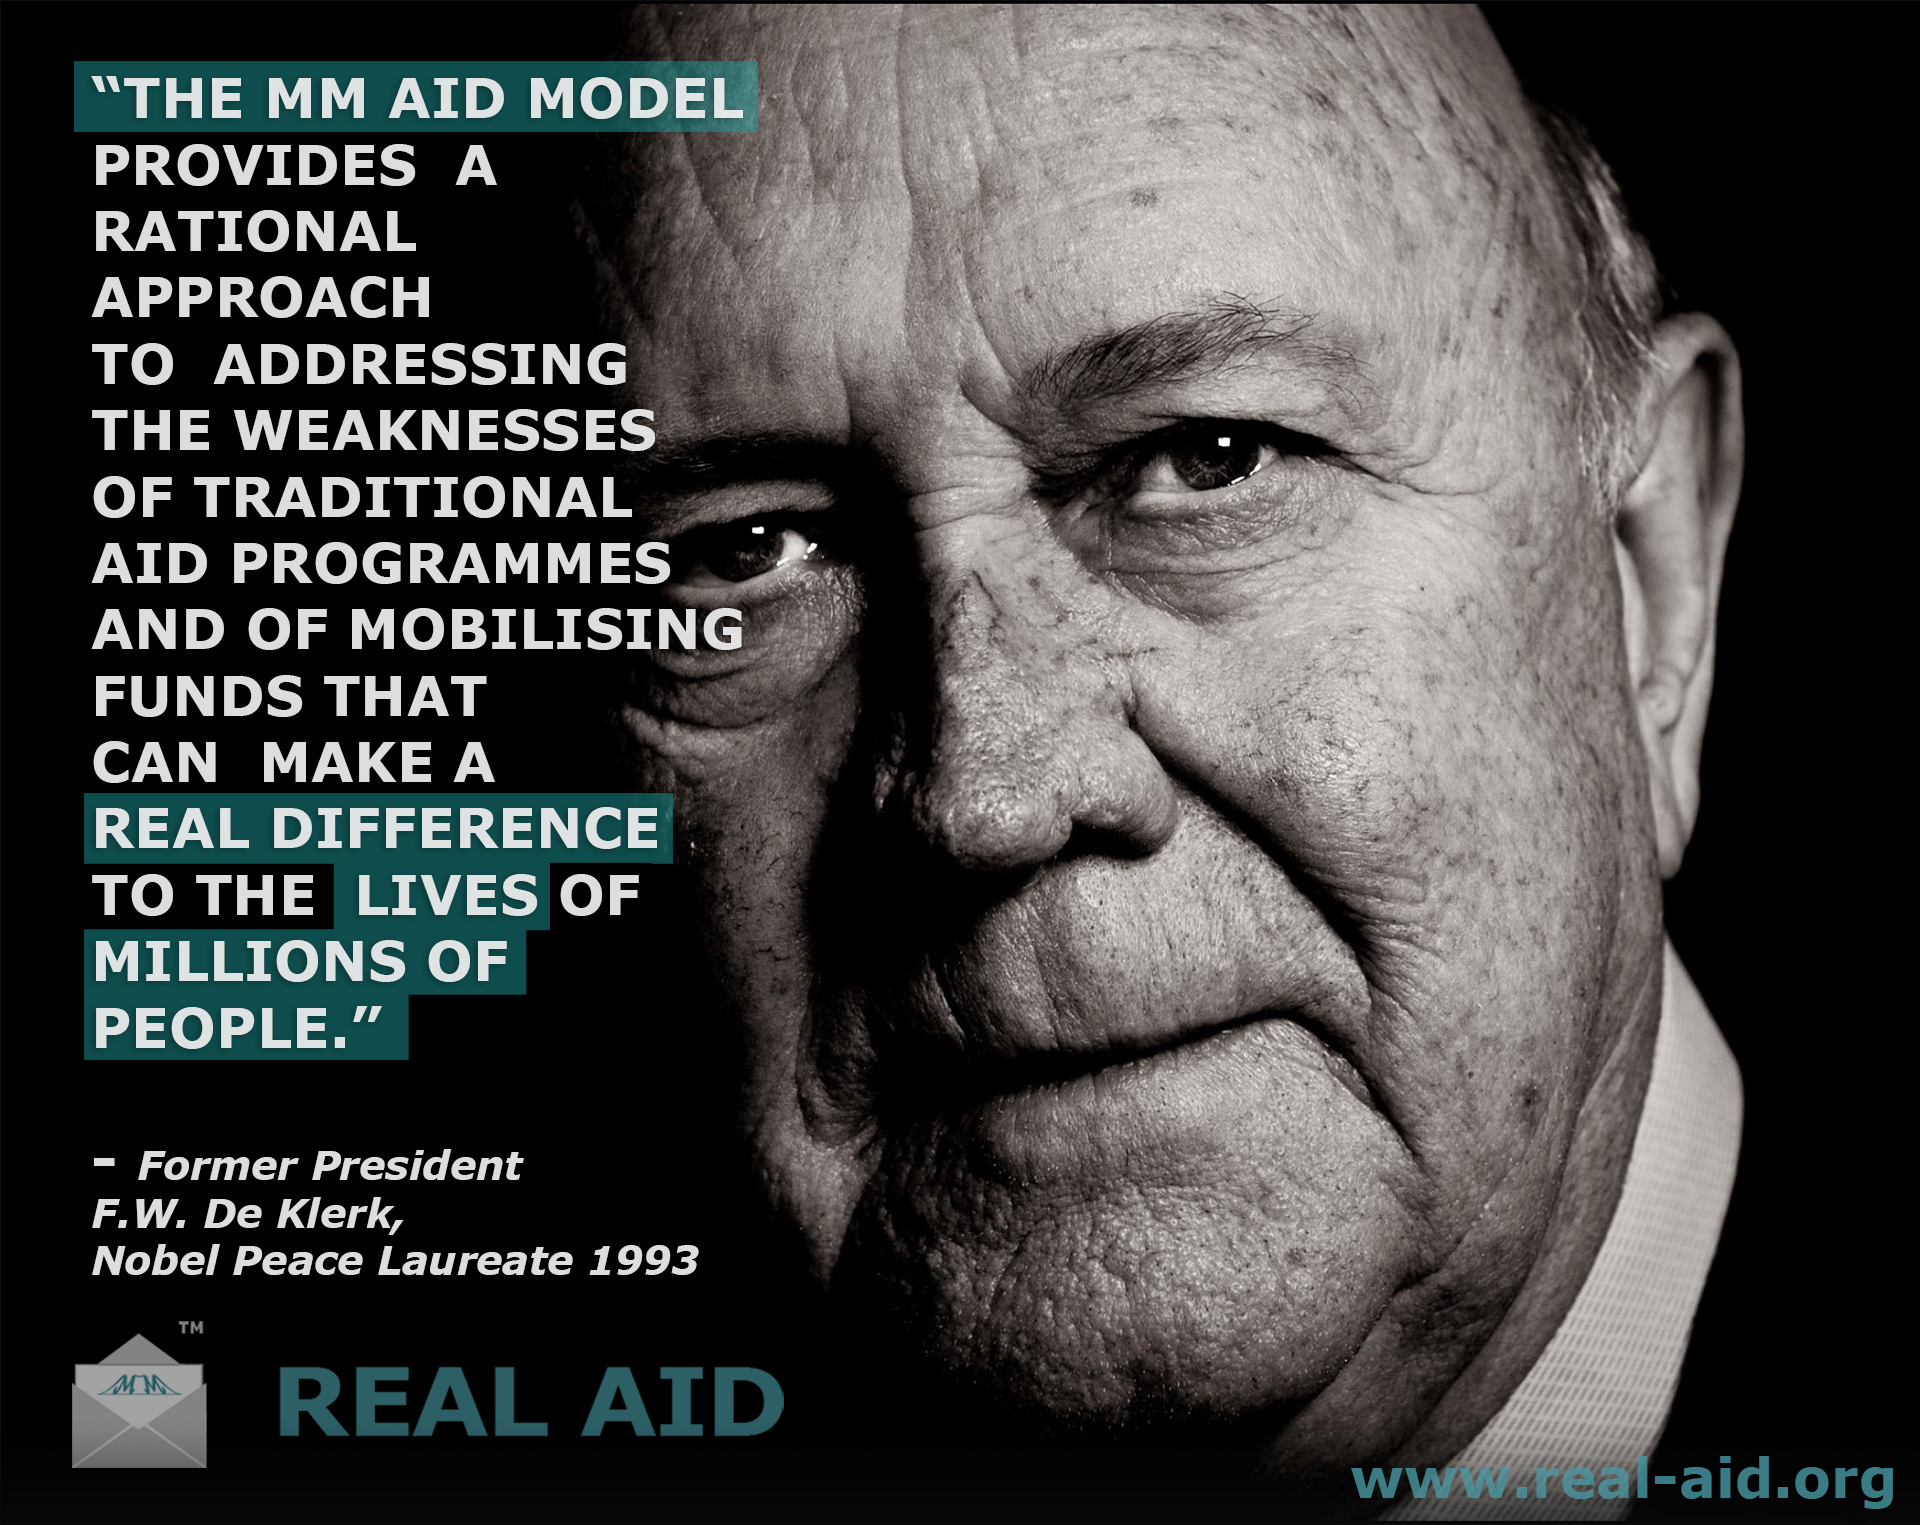 FW de Klerk portrait, quote "make a real difference to the lives of millions of people"